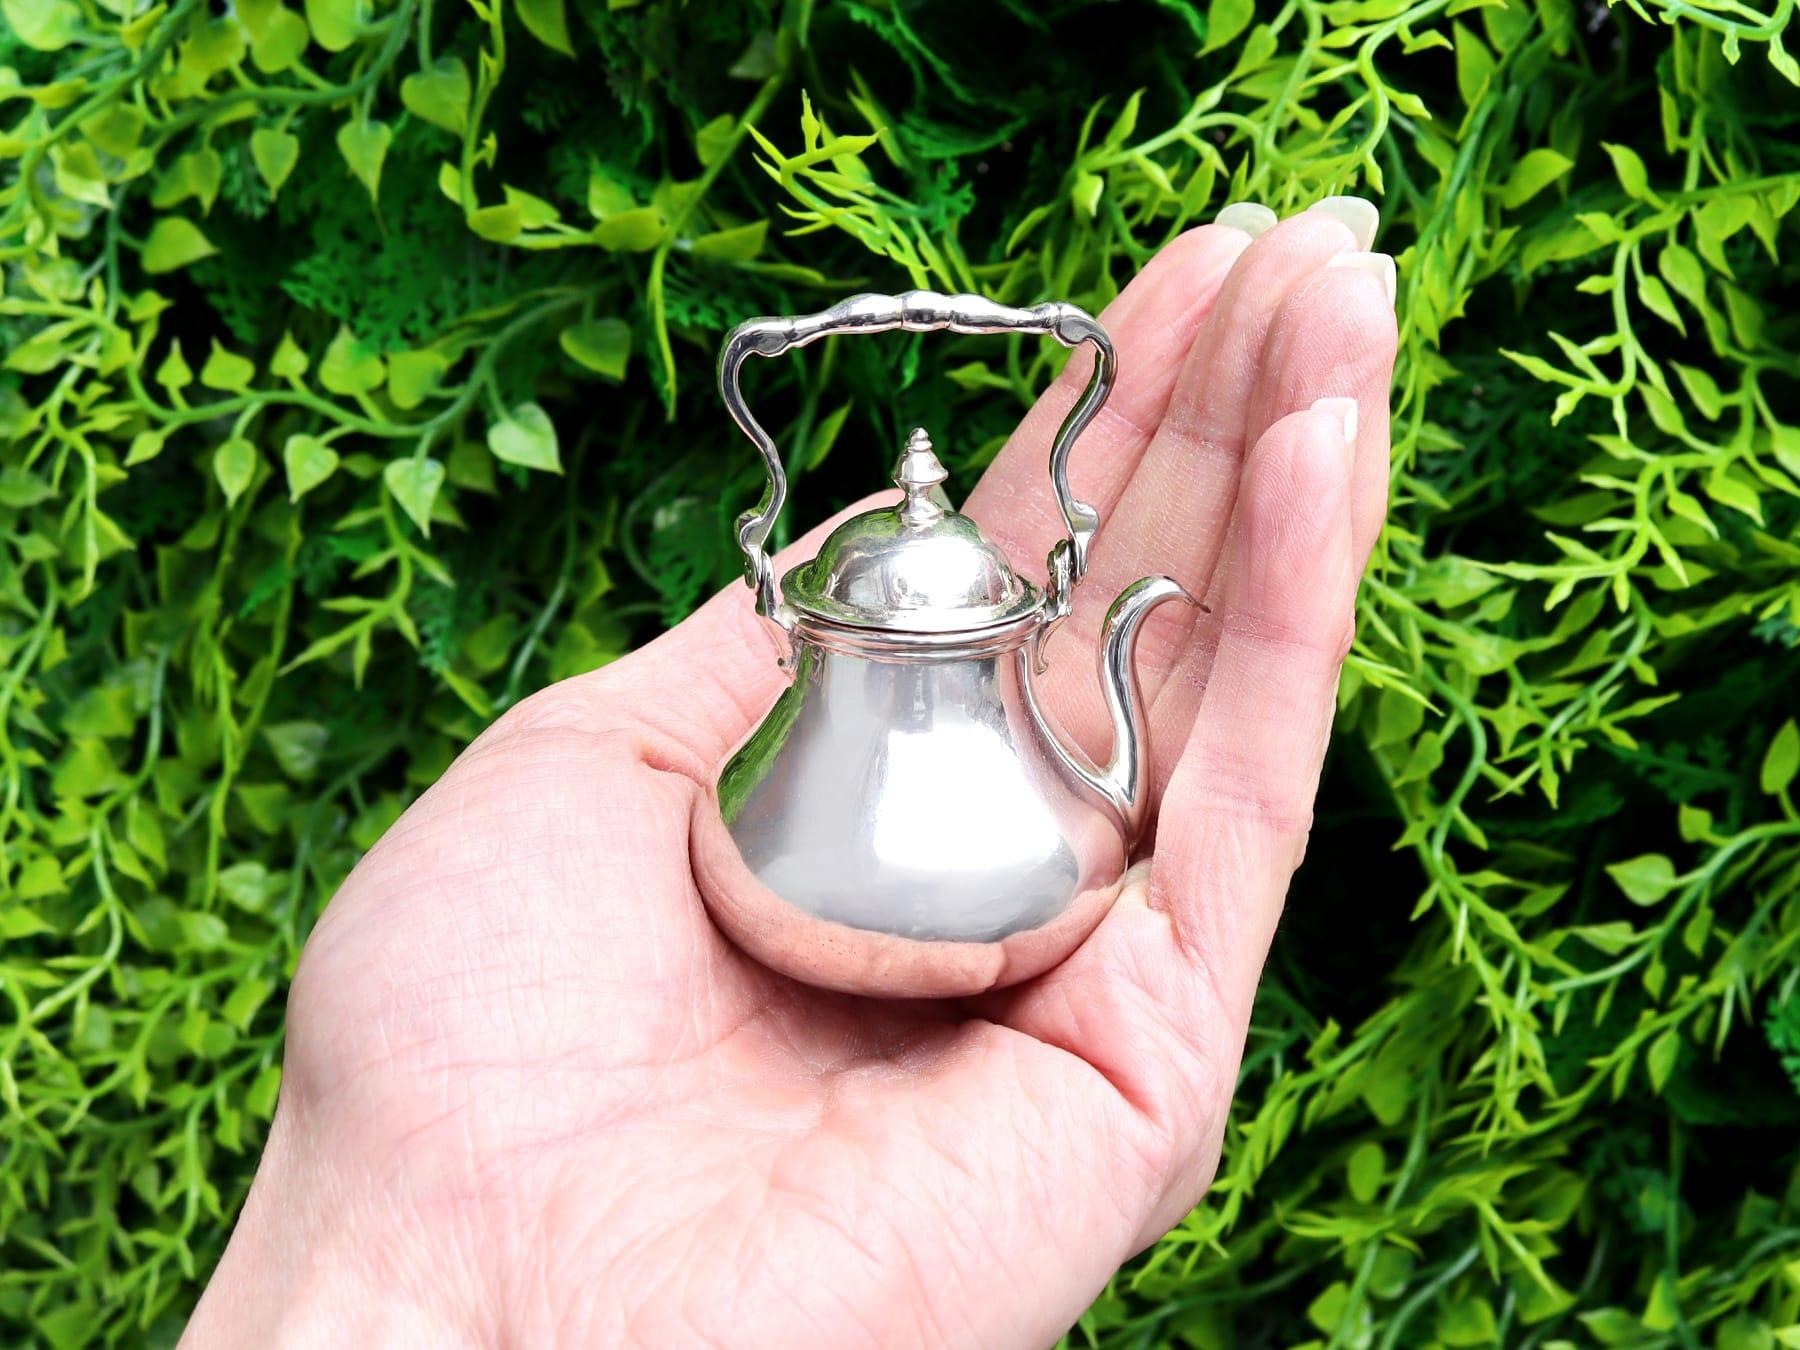 This exceptional, fine and impressive antique 18th century Dutch silver miniature tea kettle has a circular baluster shaped form.

The body of this silver kettle is plain and unembellished, with an applied border to the upper rim.

This antique